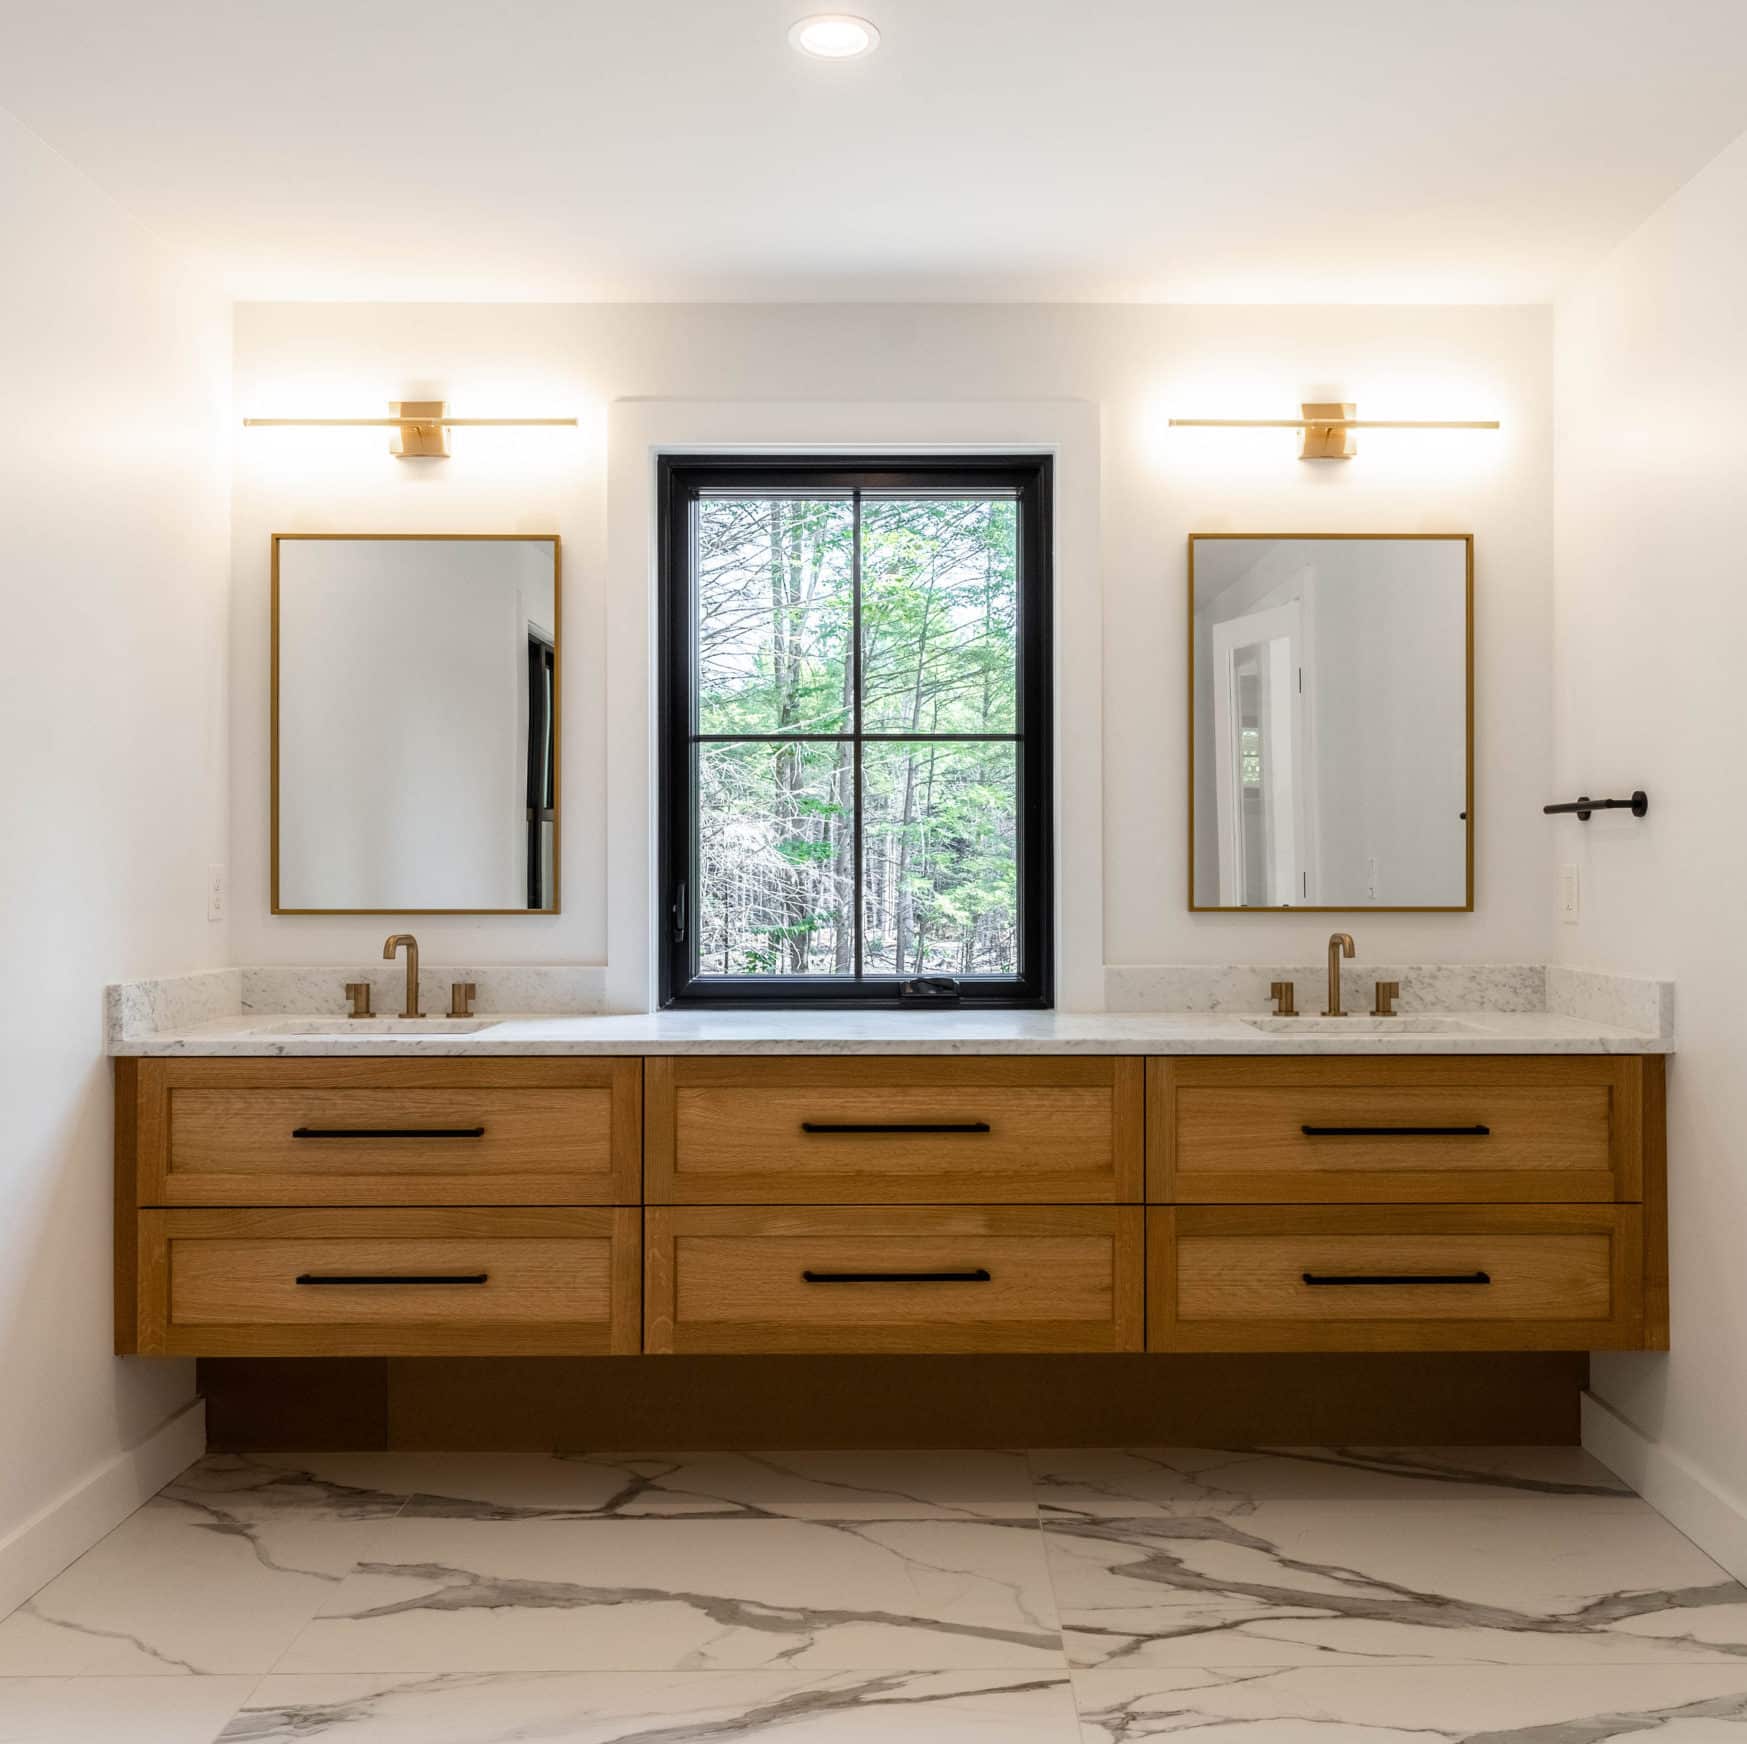 Bathroom with a floating walnut dual vanity. Each sink has a rectangular mirror above it, and there is a window between the mirrors. The floor resembles veined marble.